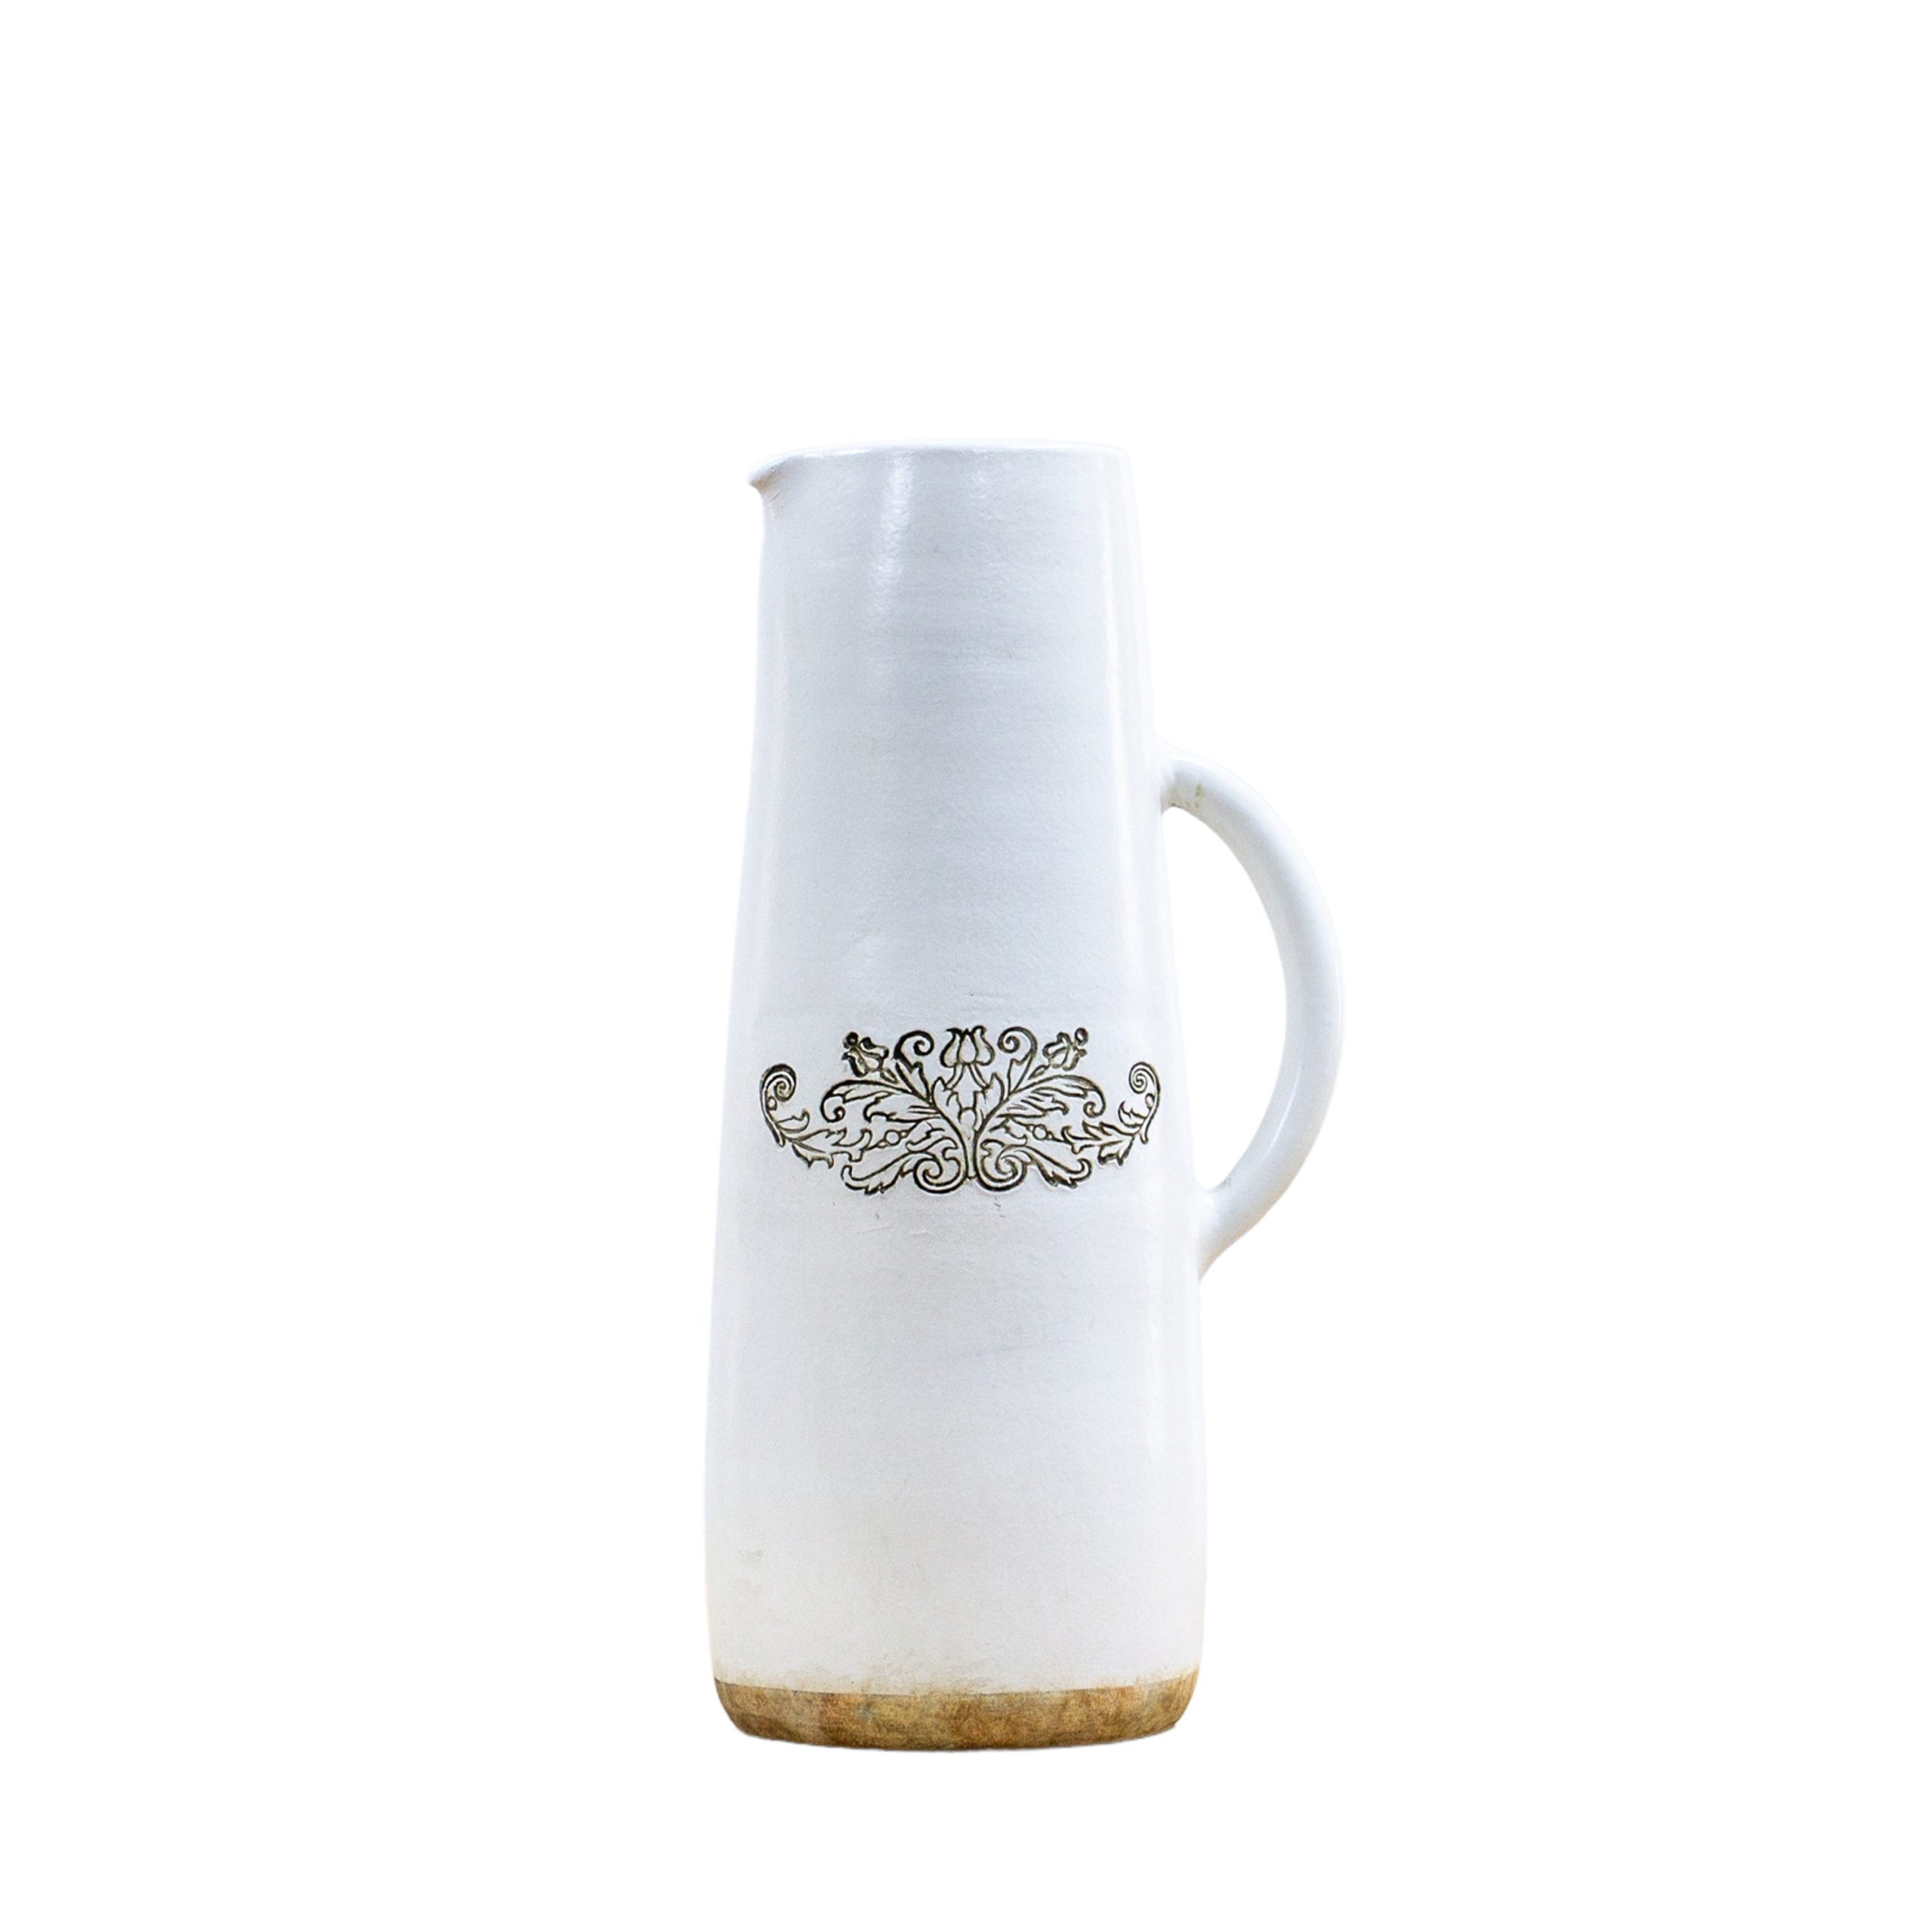 Gallery Direct Winchester Pitcher Large White